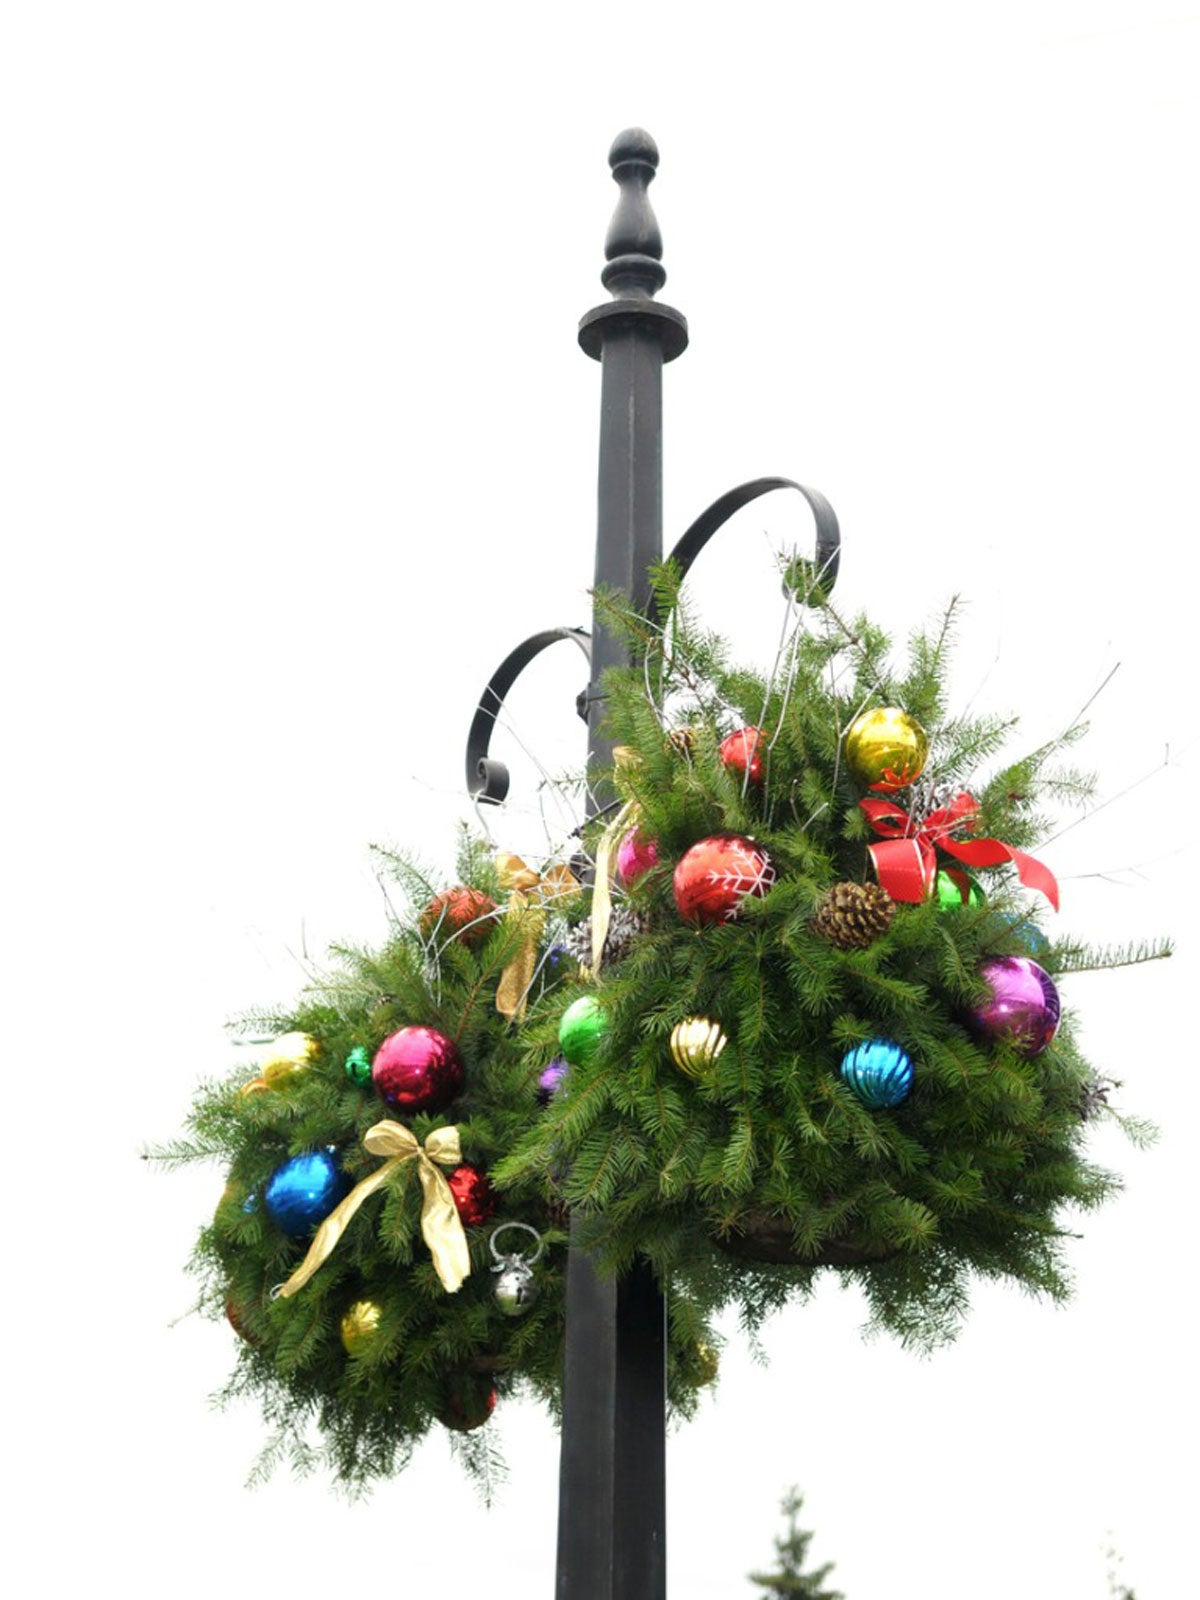 How To Turn Hanging Baskets Into Christmas Decorations!